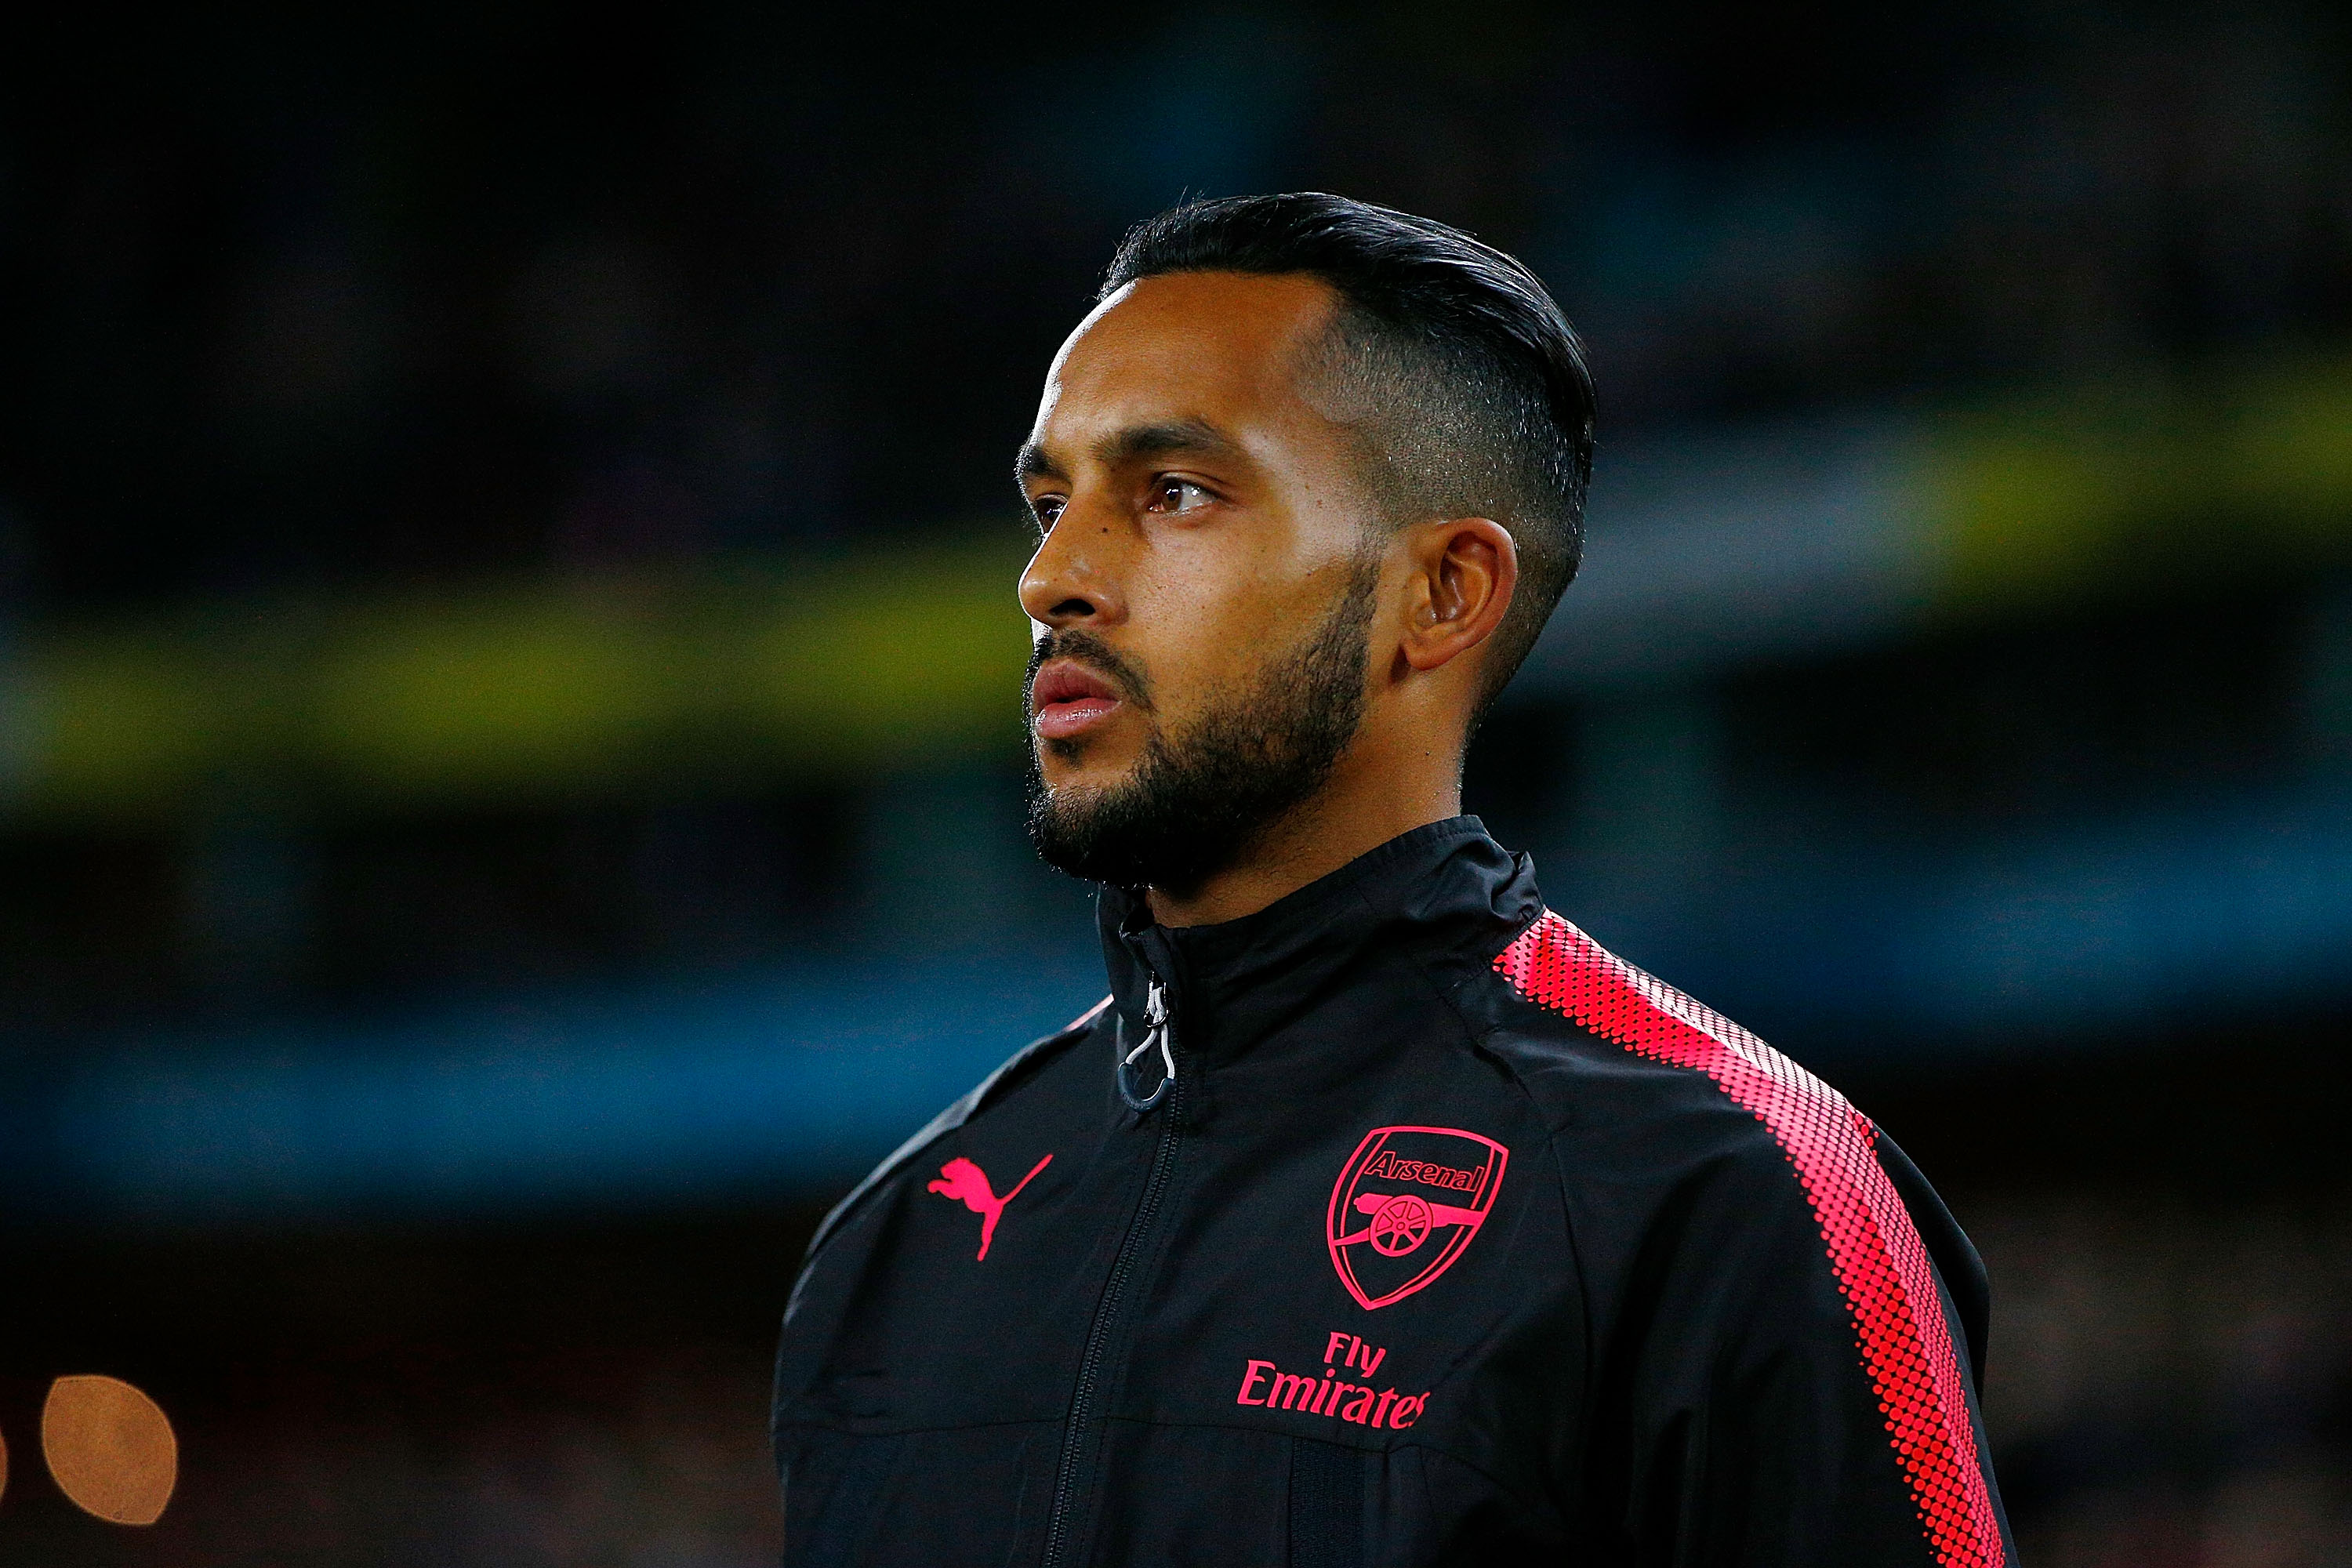 SYDNEY, AUSTRALIA - JULY 13: Theo Walcott of Arsenal takes the field during the match between Sydney FC and Arsenal FC at ANZ Stadium on July 13, 2017 in Sydney, Australia.  (Photo by Zak Kaczmarek/Getty Images)